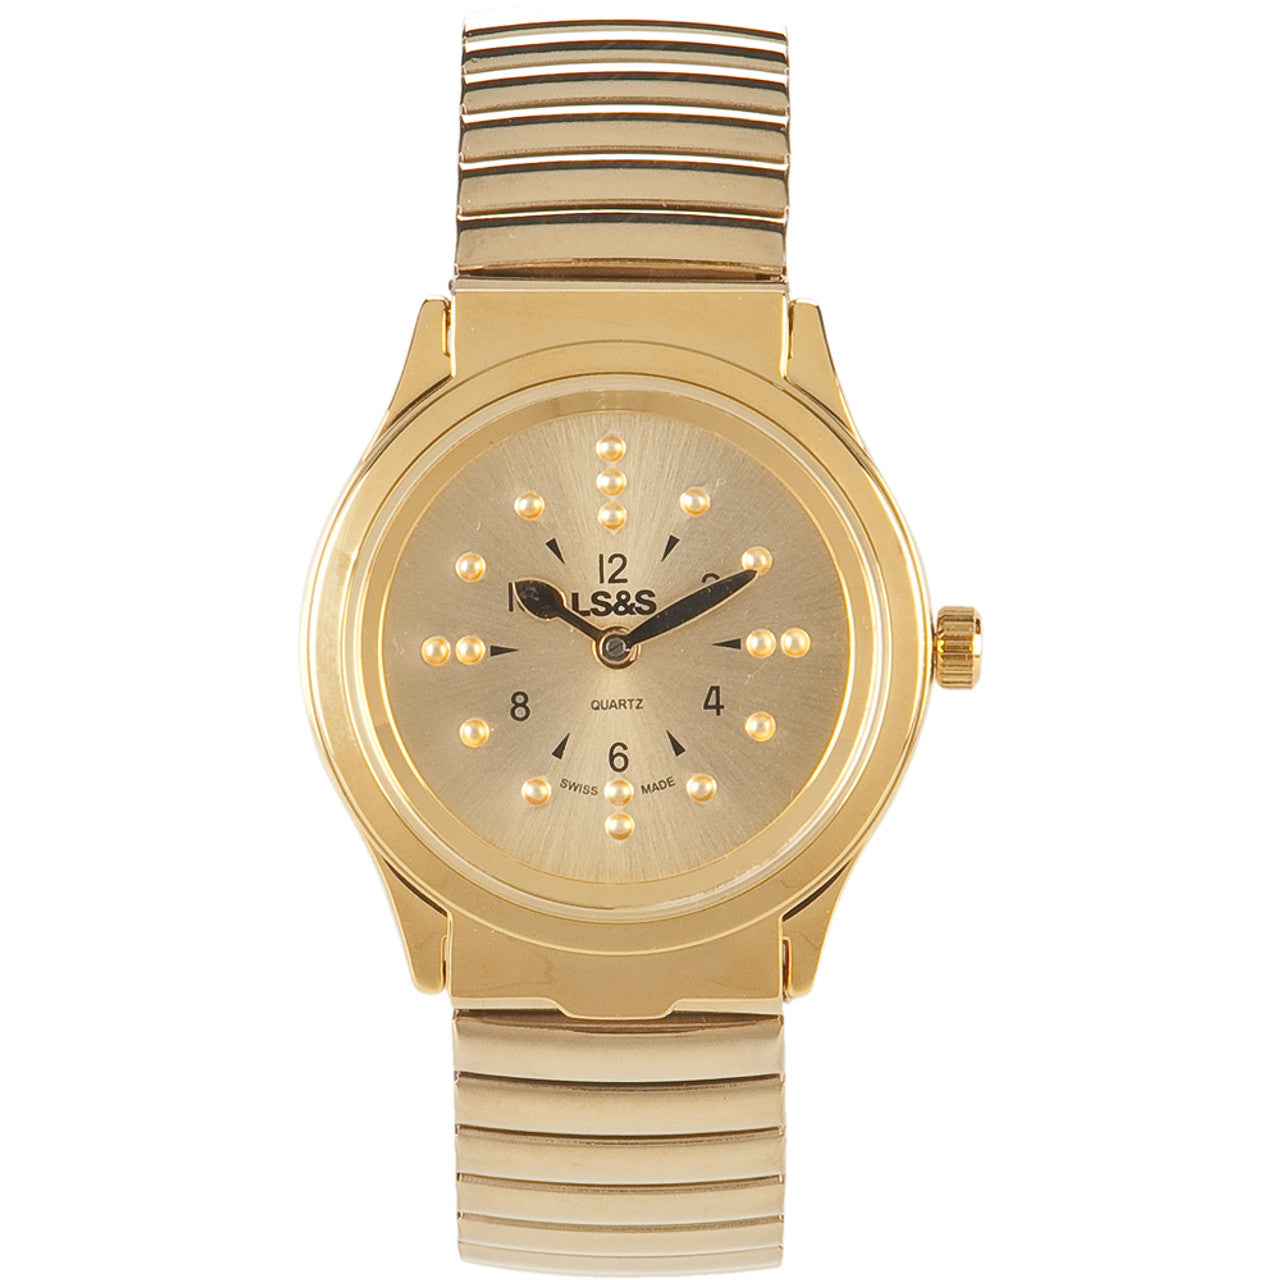 Gold tone braille watch with flex band